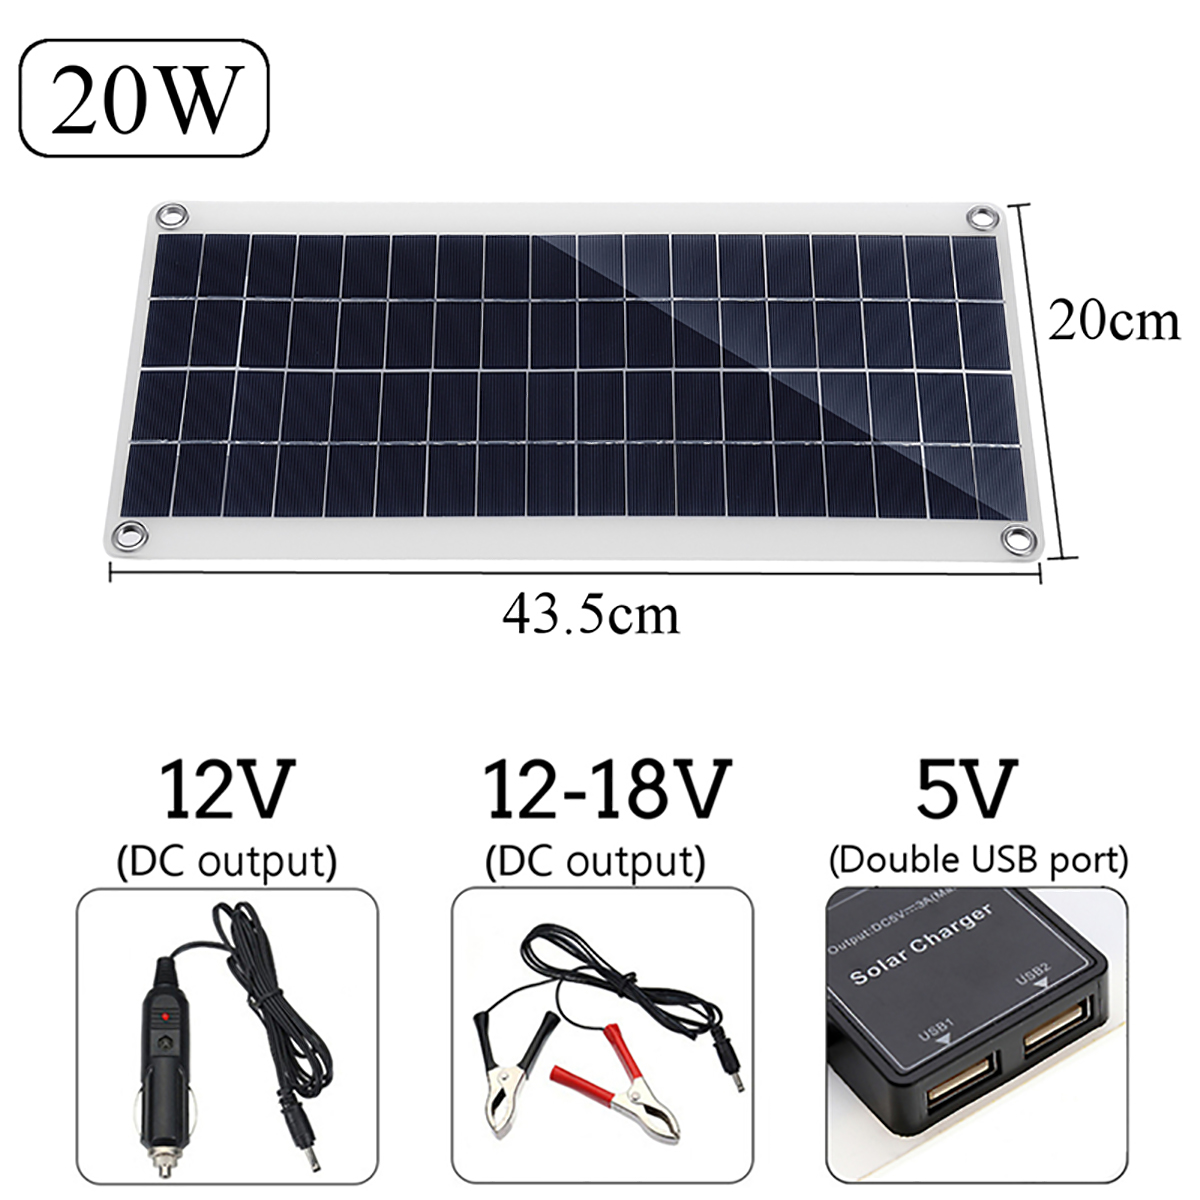 20W-Portable-Solar-Panel-Kit-DC-USB-Charging-Double-USB-Port-Suction-Cups-Camping-Traveling-1383681-1